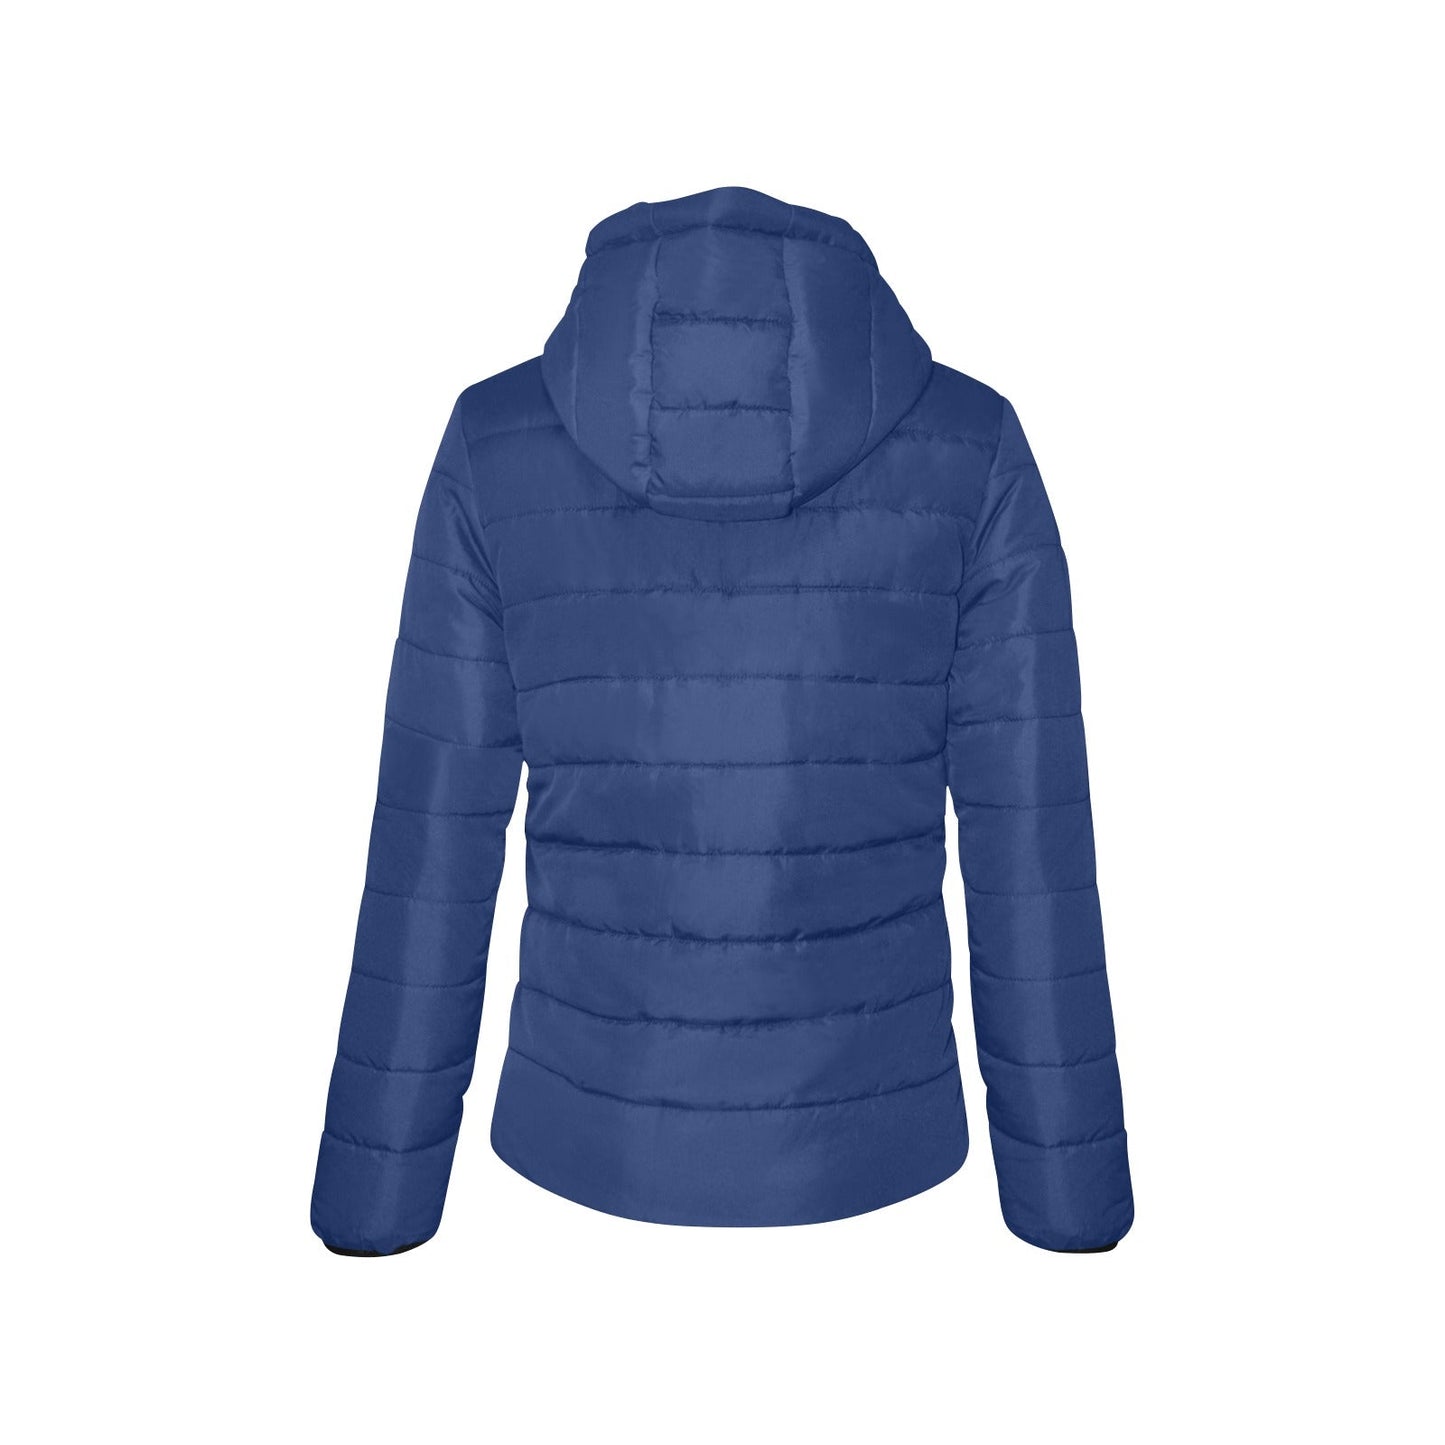 CIRCUITO MIKE G - Women's Hooded puffer jacket - Midnight Blue